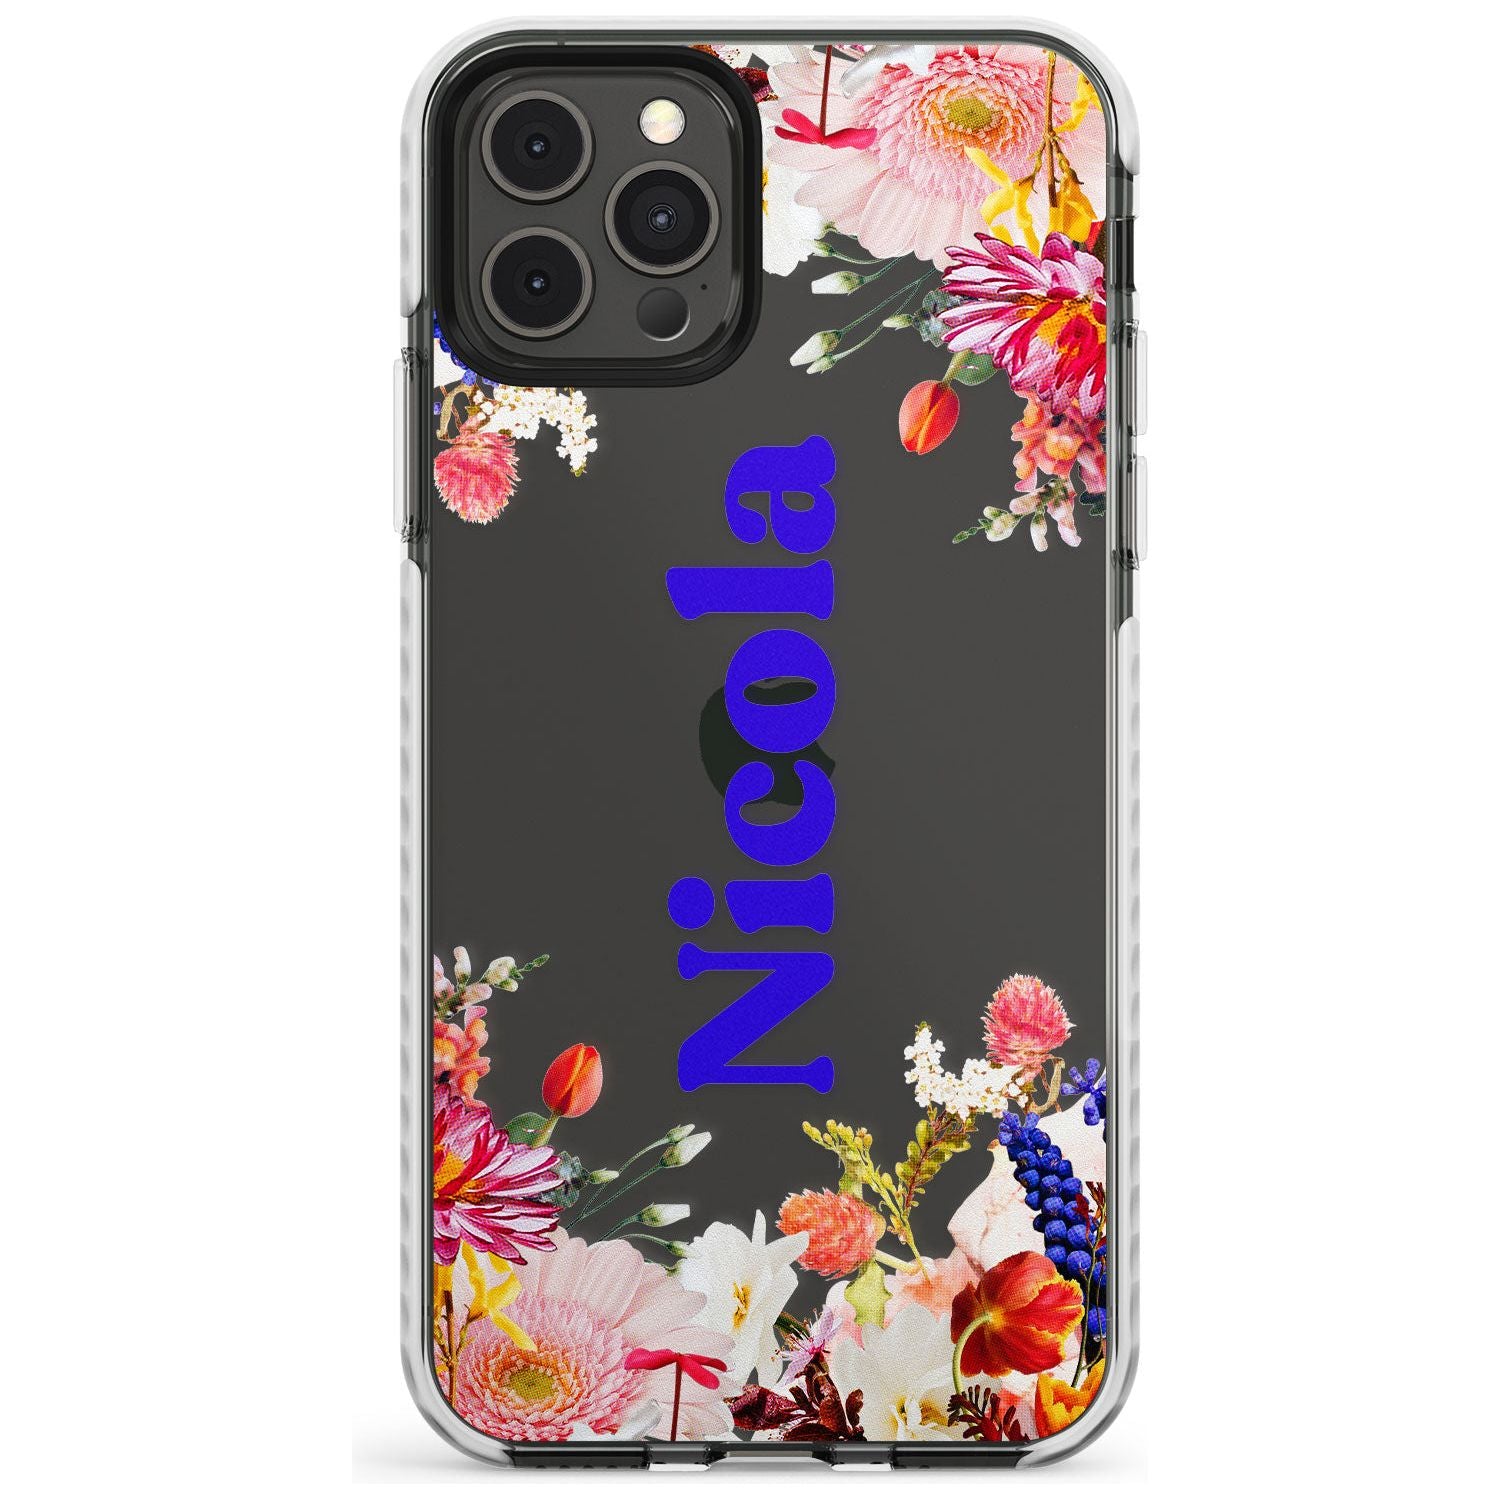 Custom Text with Floral Borders Slim TPU Phone Case for iPhone 11 Pro Max